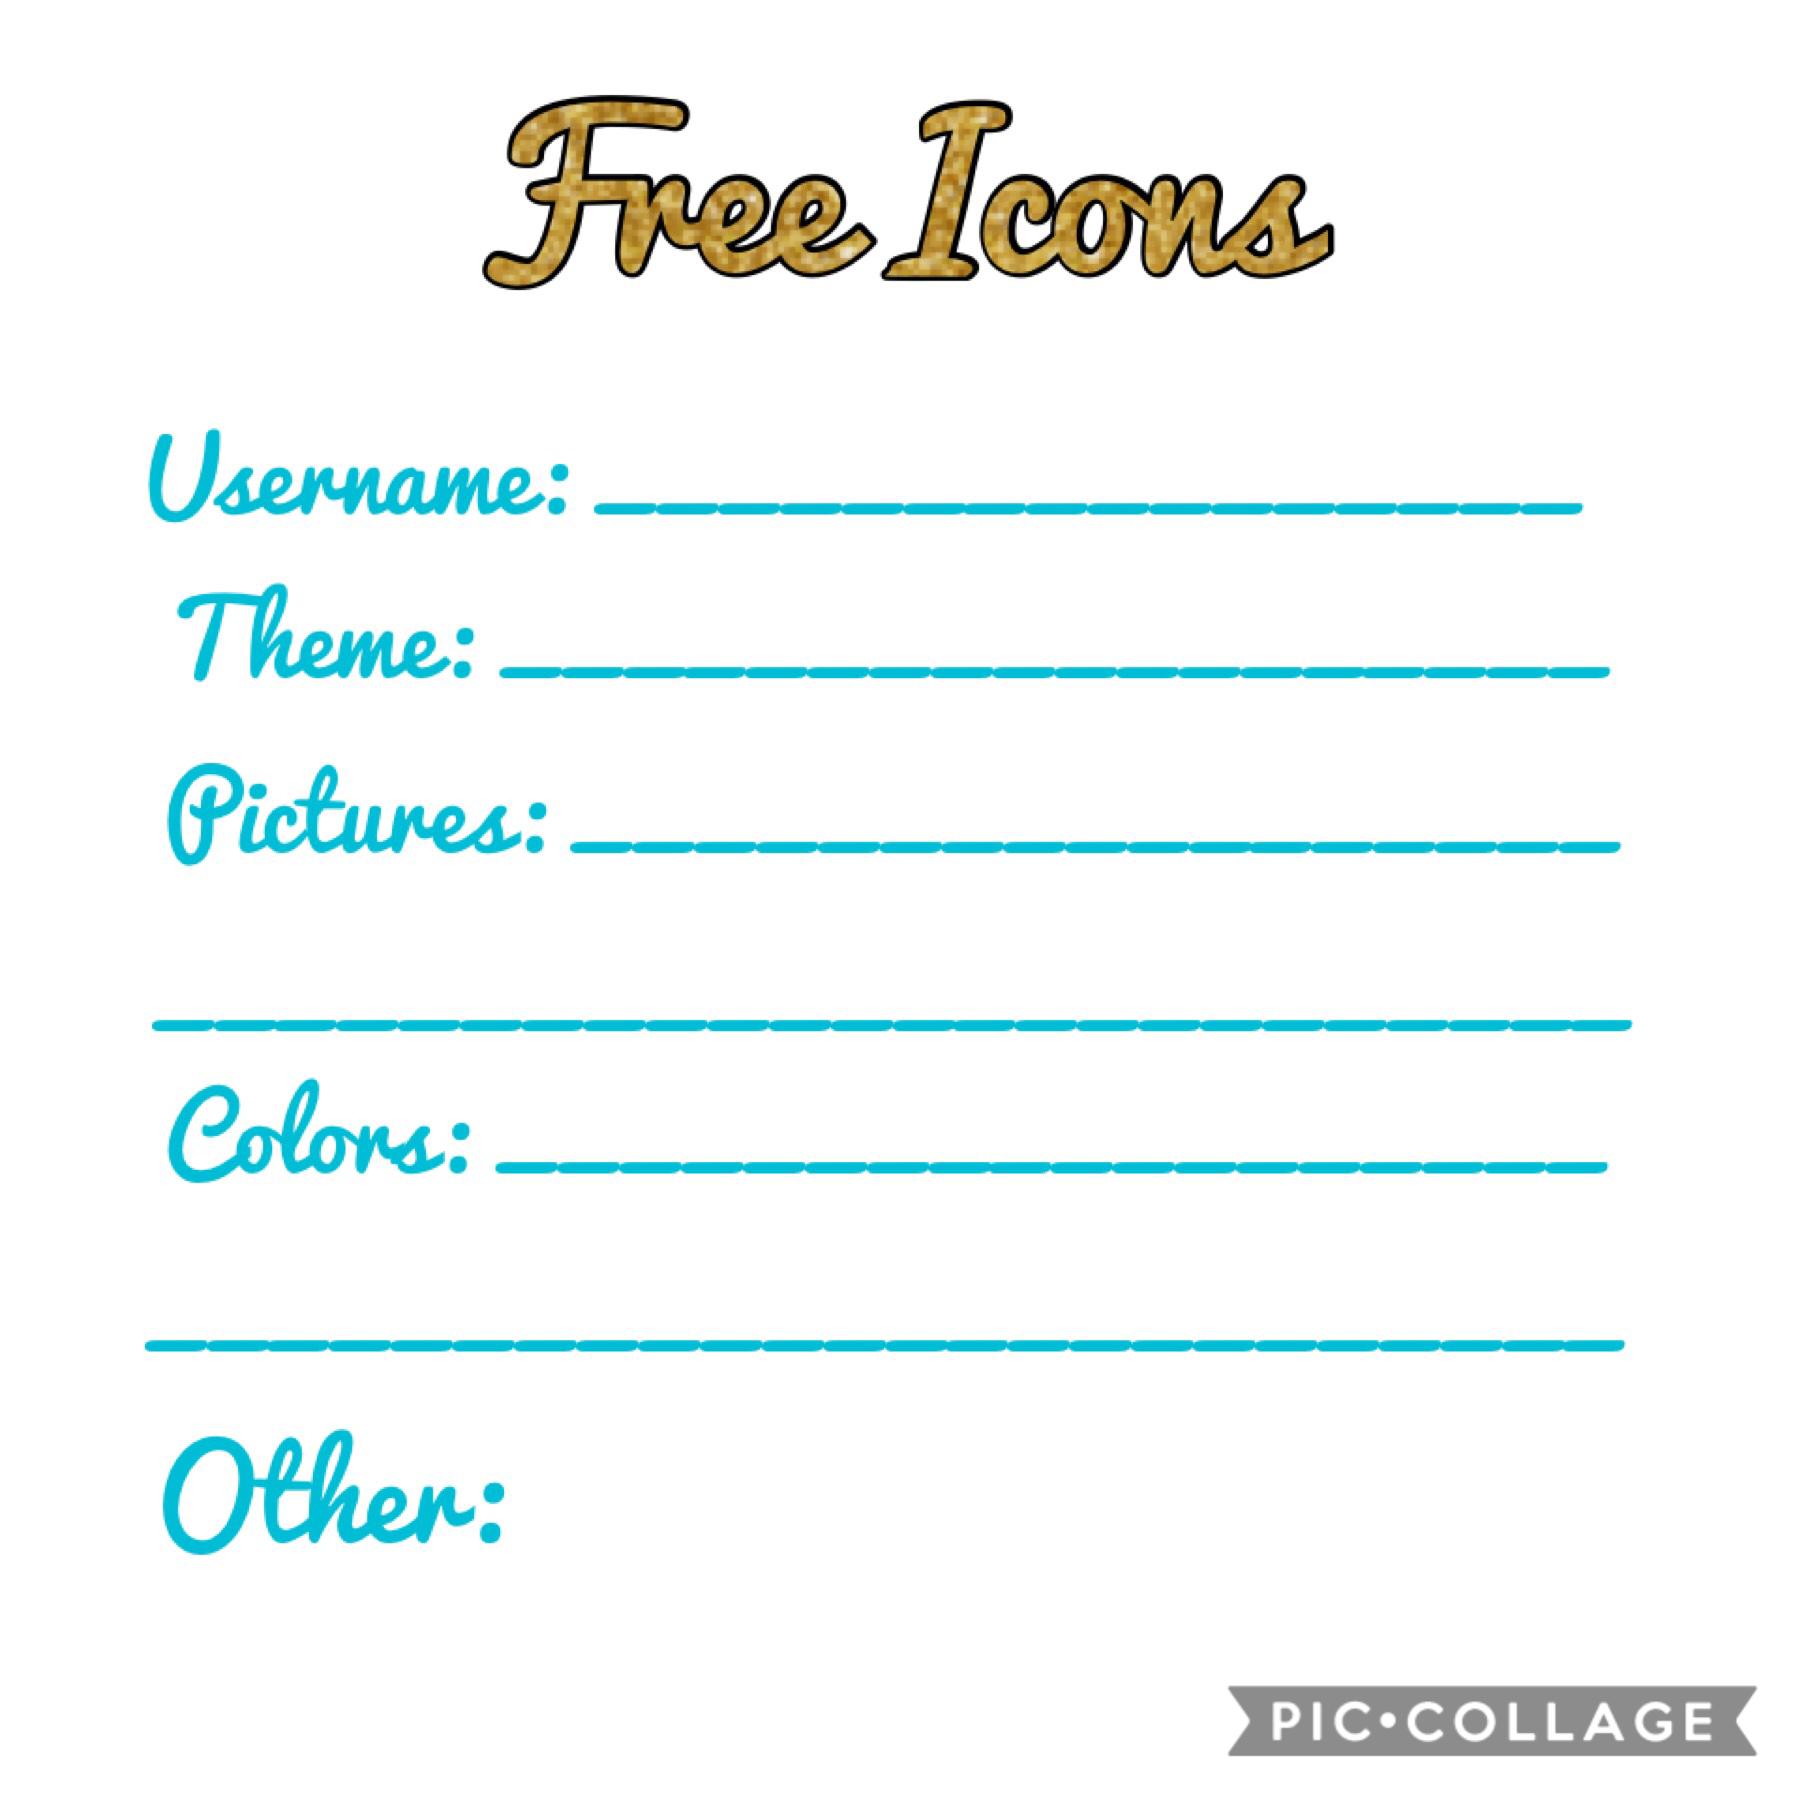 Need an new icon? Fill out this form, and I will make you one. 